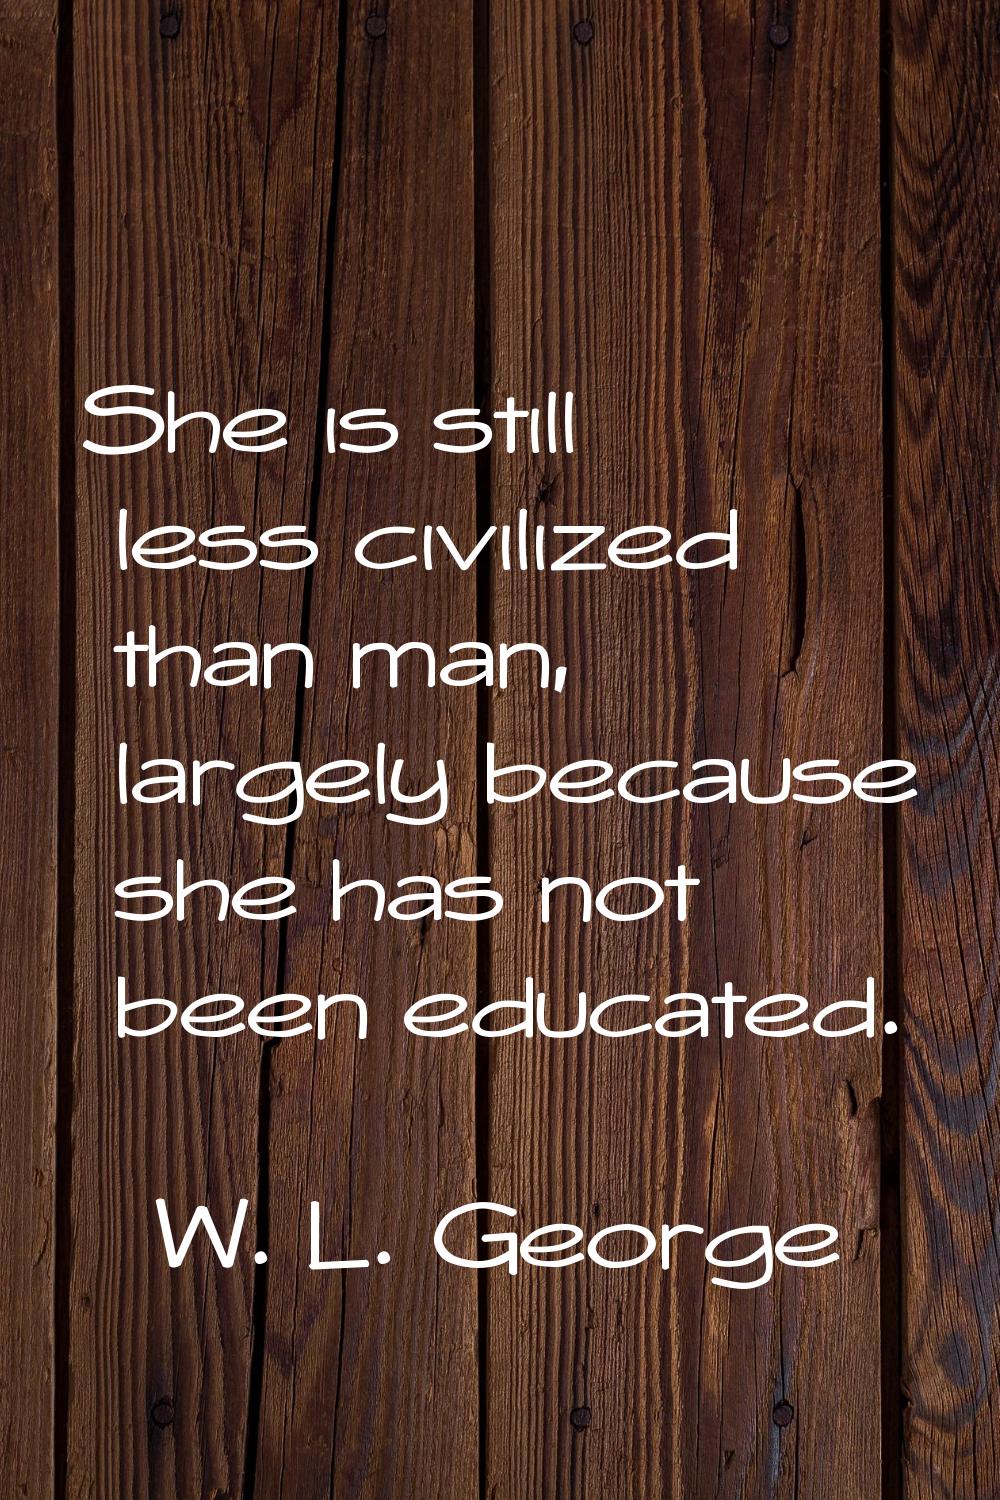 She is still less civilized than man, largely because she has not been educated.